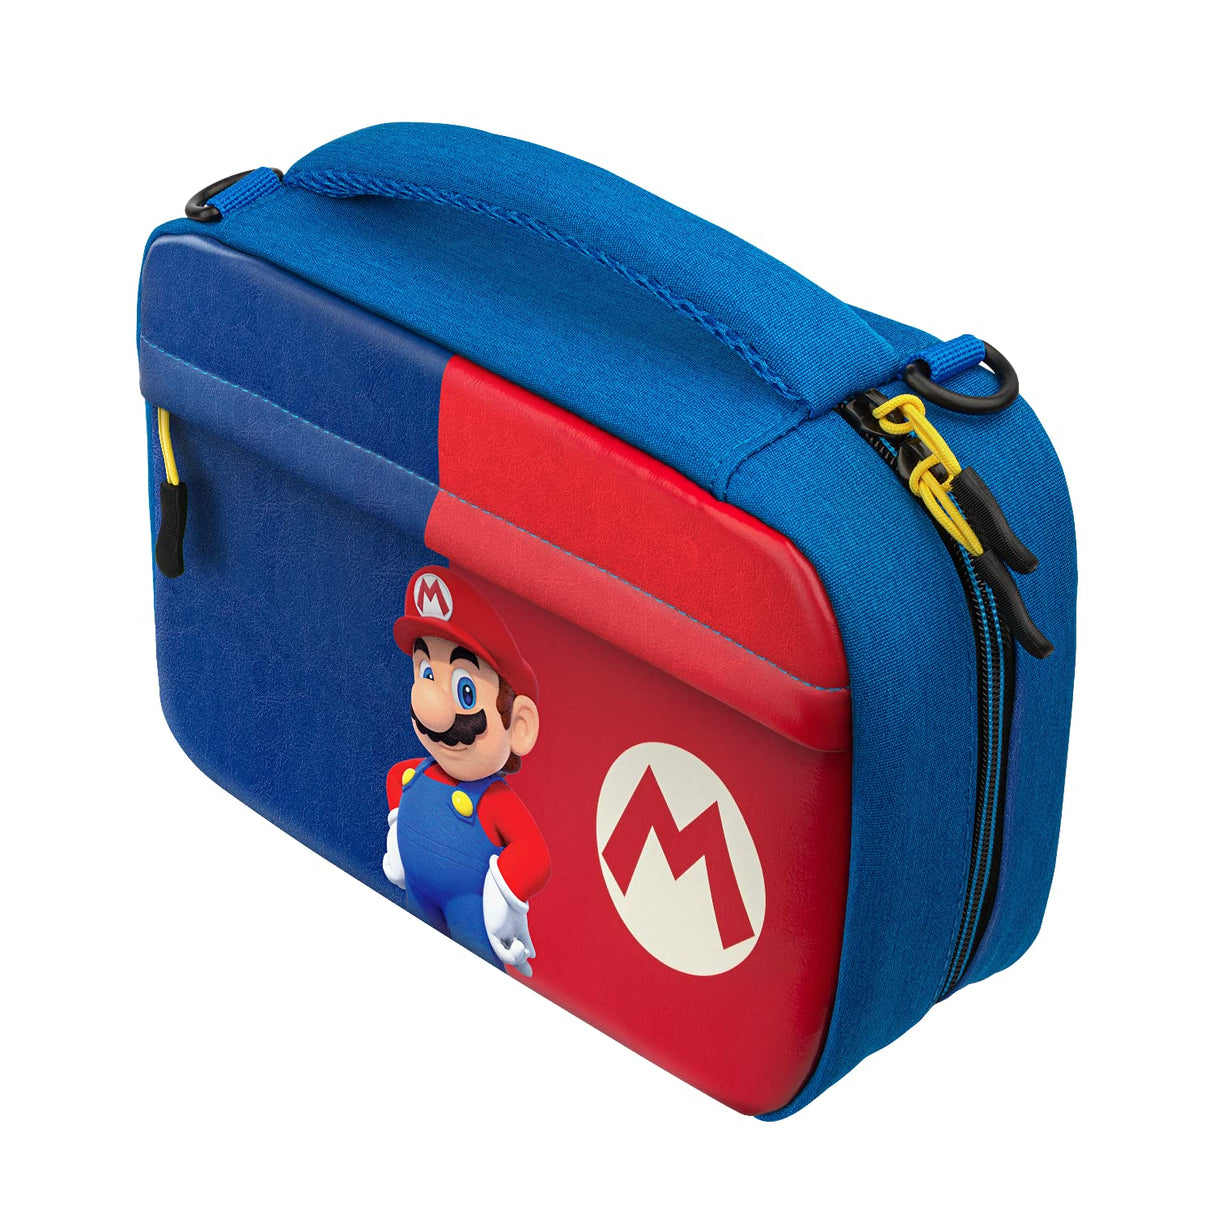 PDP Gaming Officially Licensed Switch Commuter Case - Mario - Semi-Hardshell Protection - Protective PU Leather - Holds 14 Games &amp; Console - Works with Switch OLED &amp; Lite - Perfect for Kids / Travel Power Pose Mario